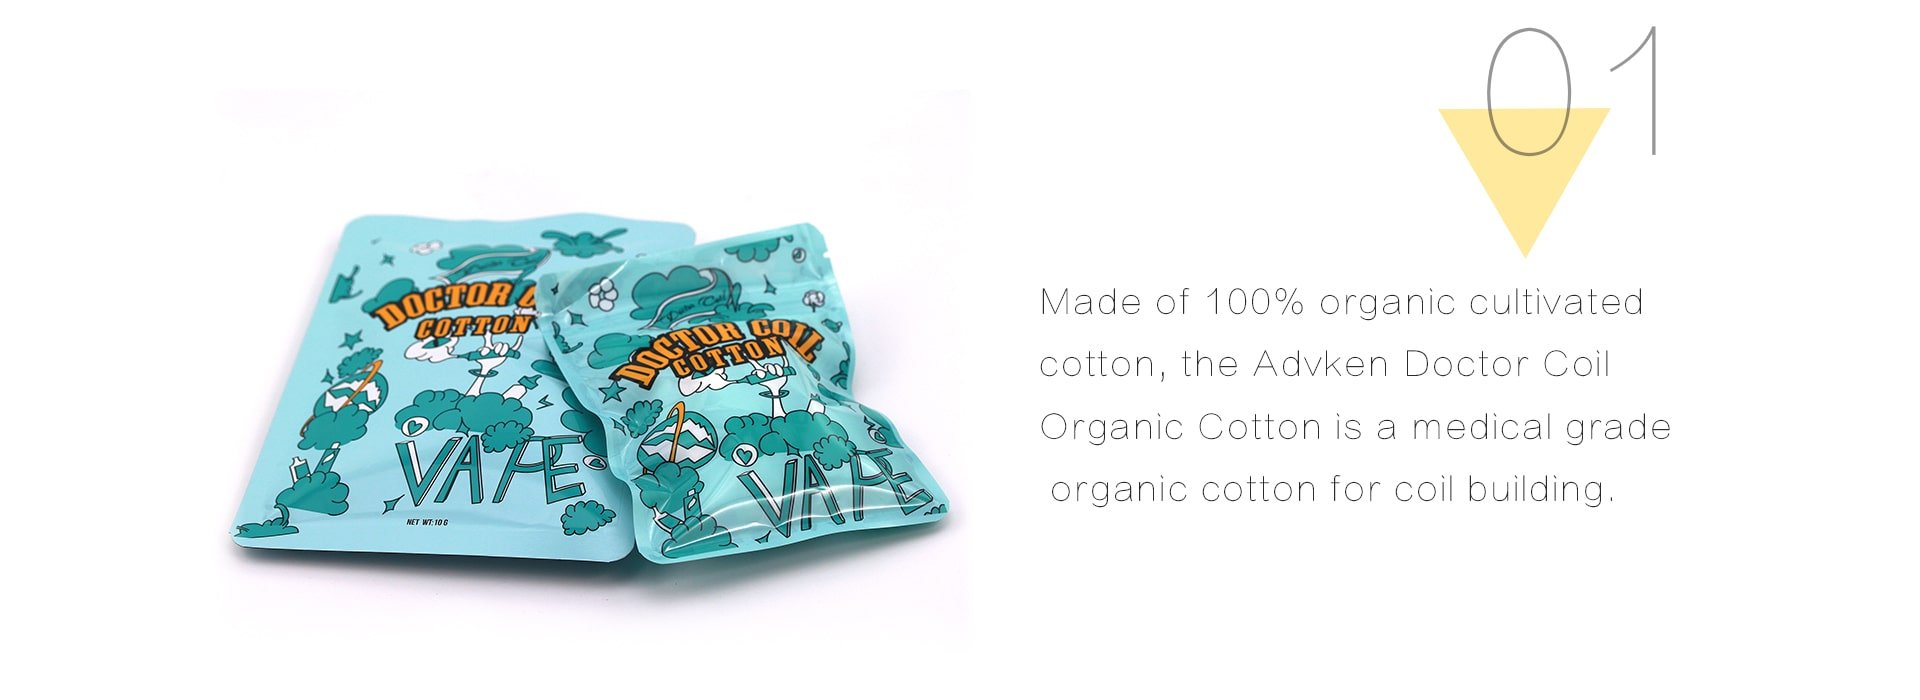 Advken 100% organically cultivated Cotton